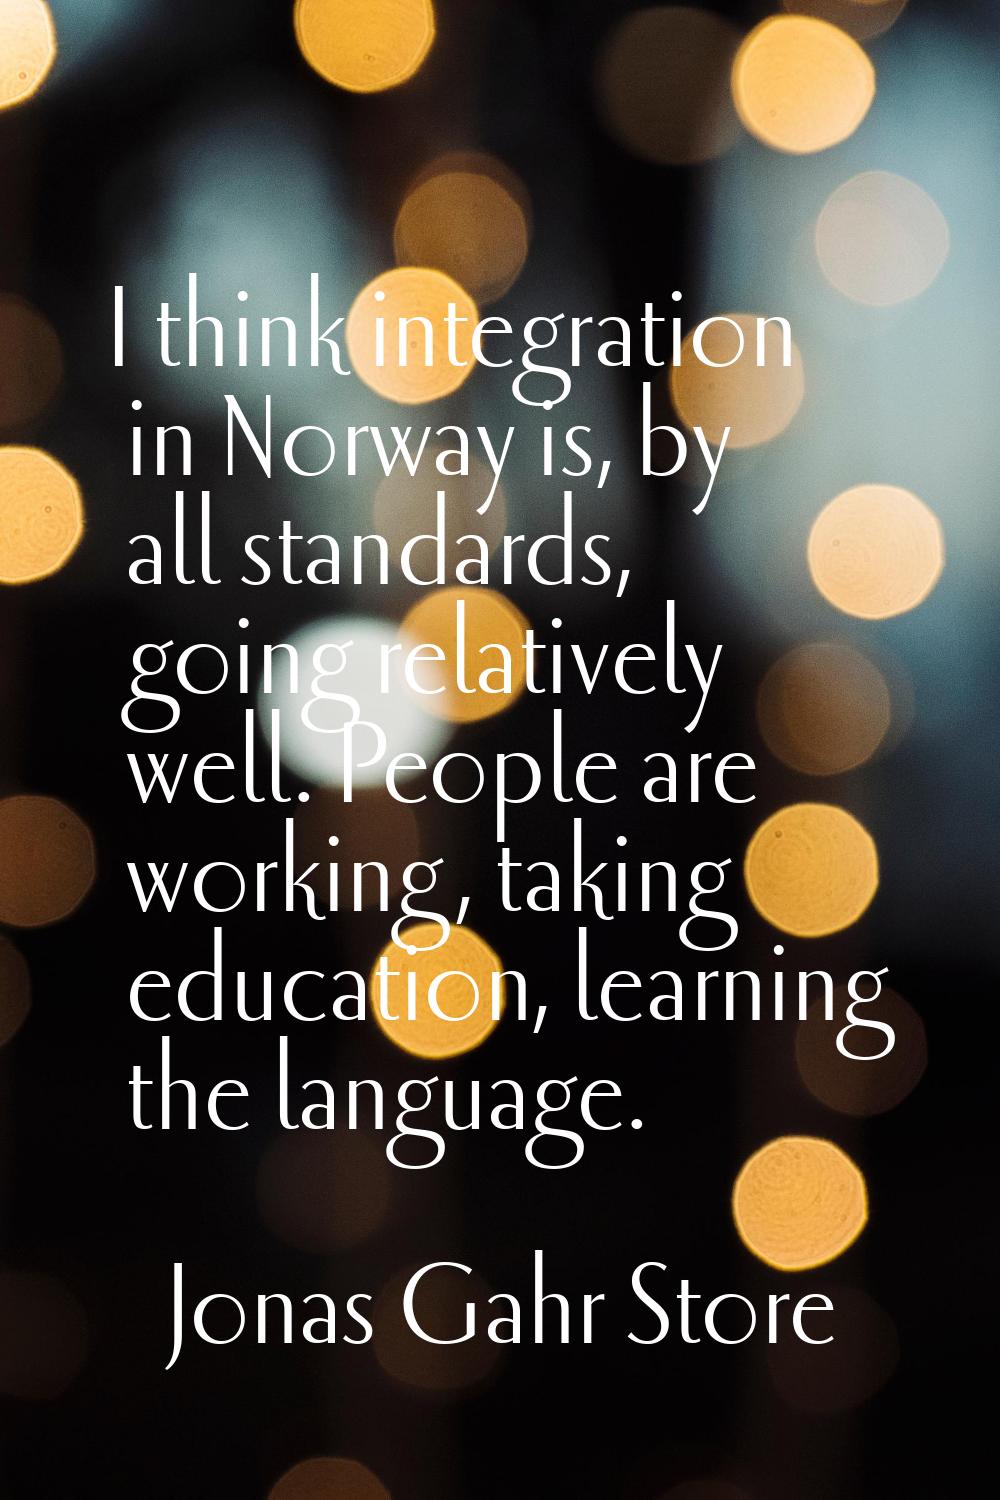 I think integration in Norway is, by all standards, going relatively well. People are working, taki